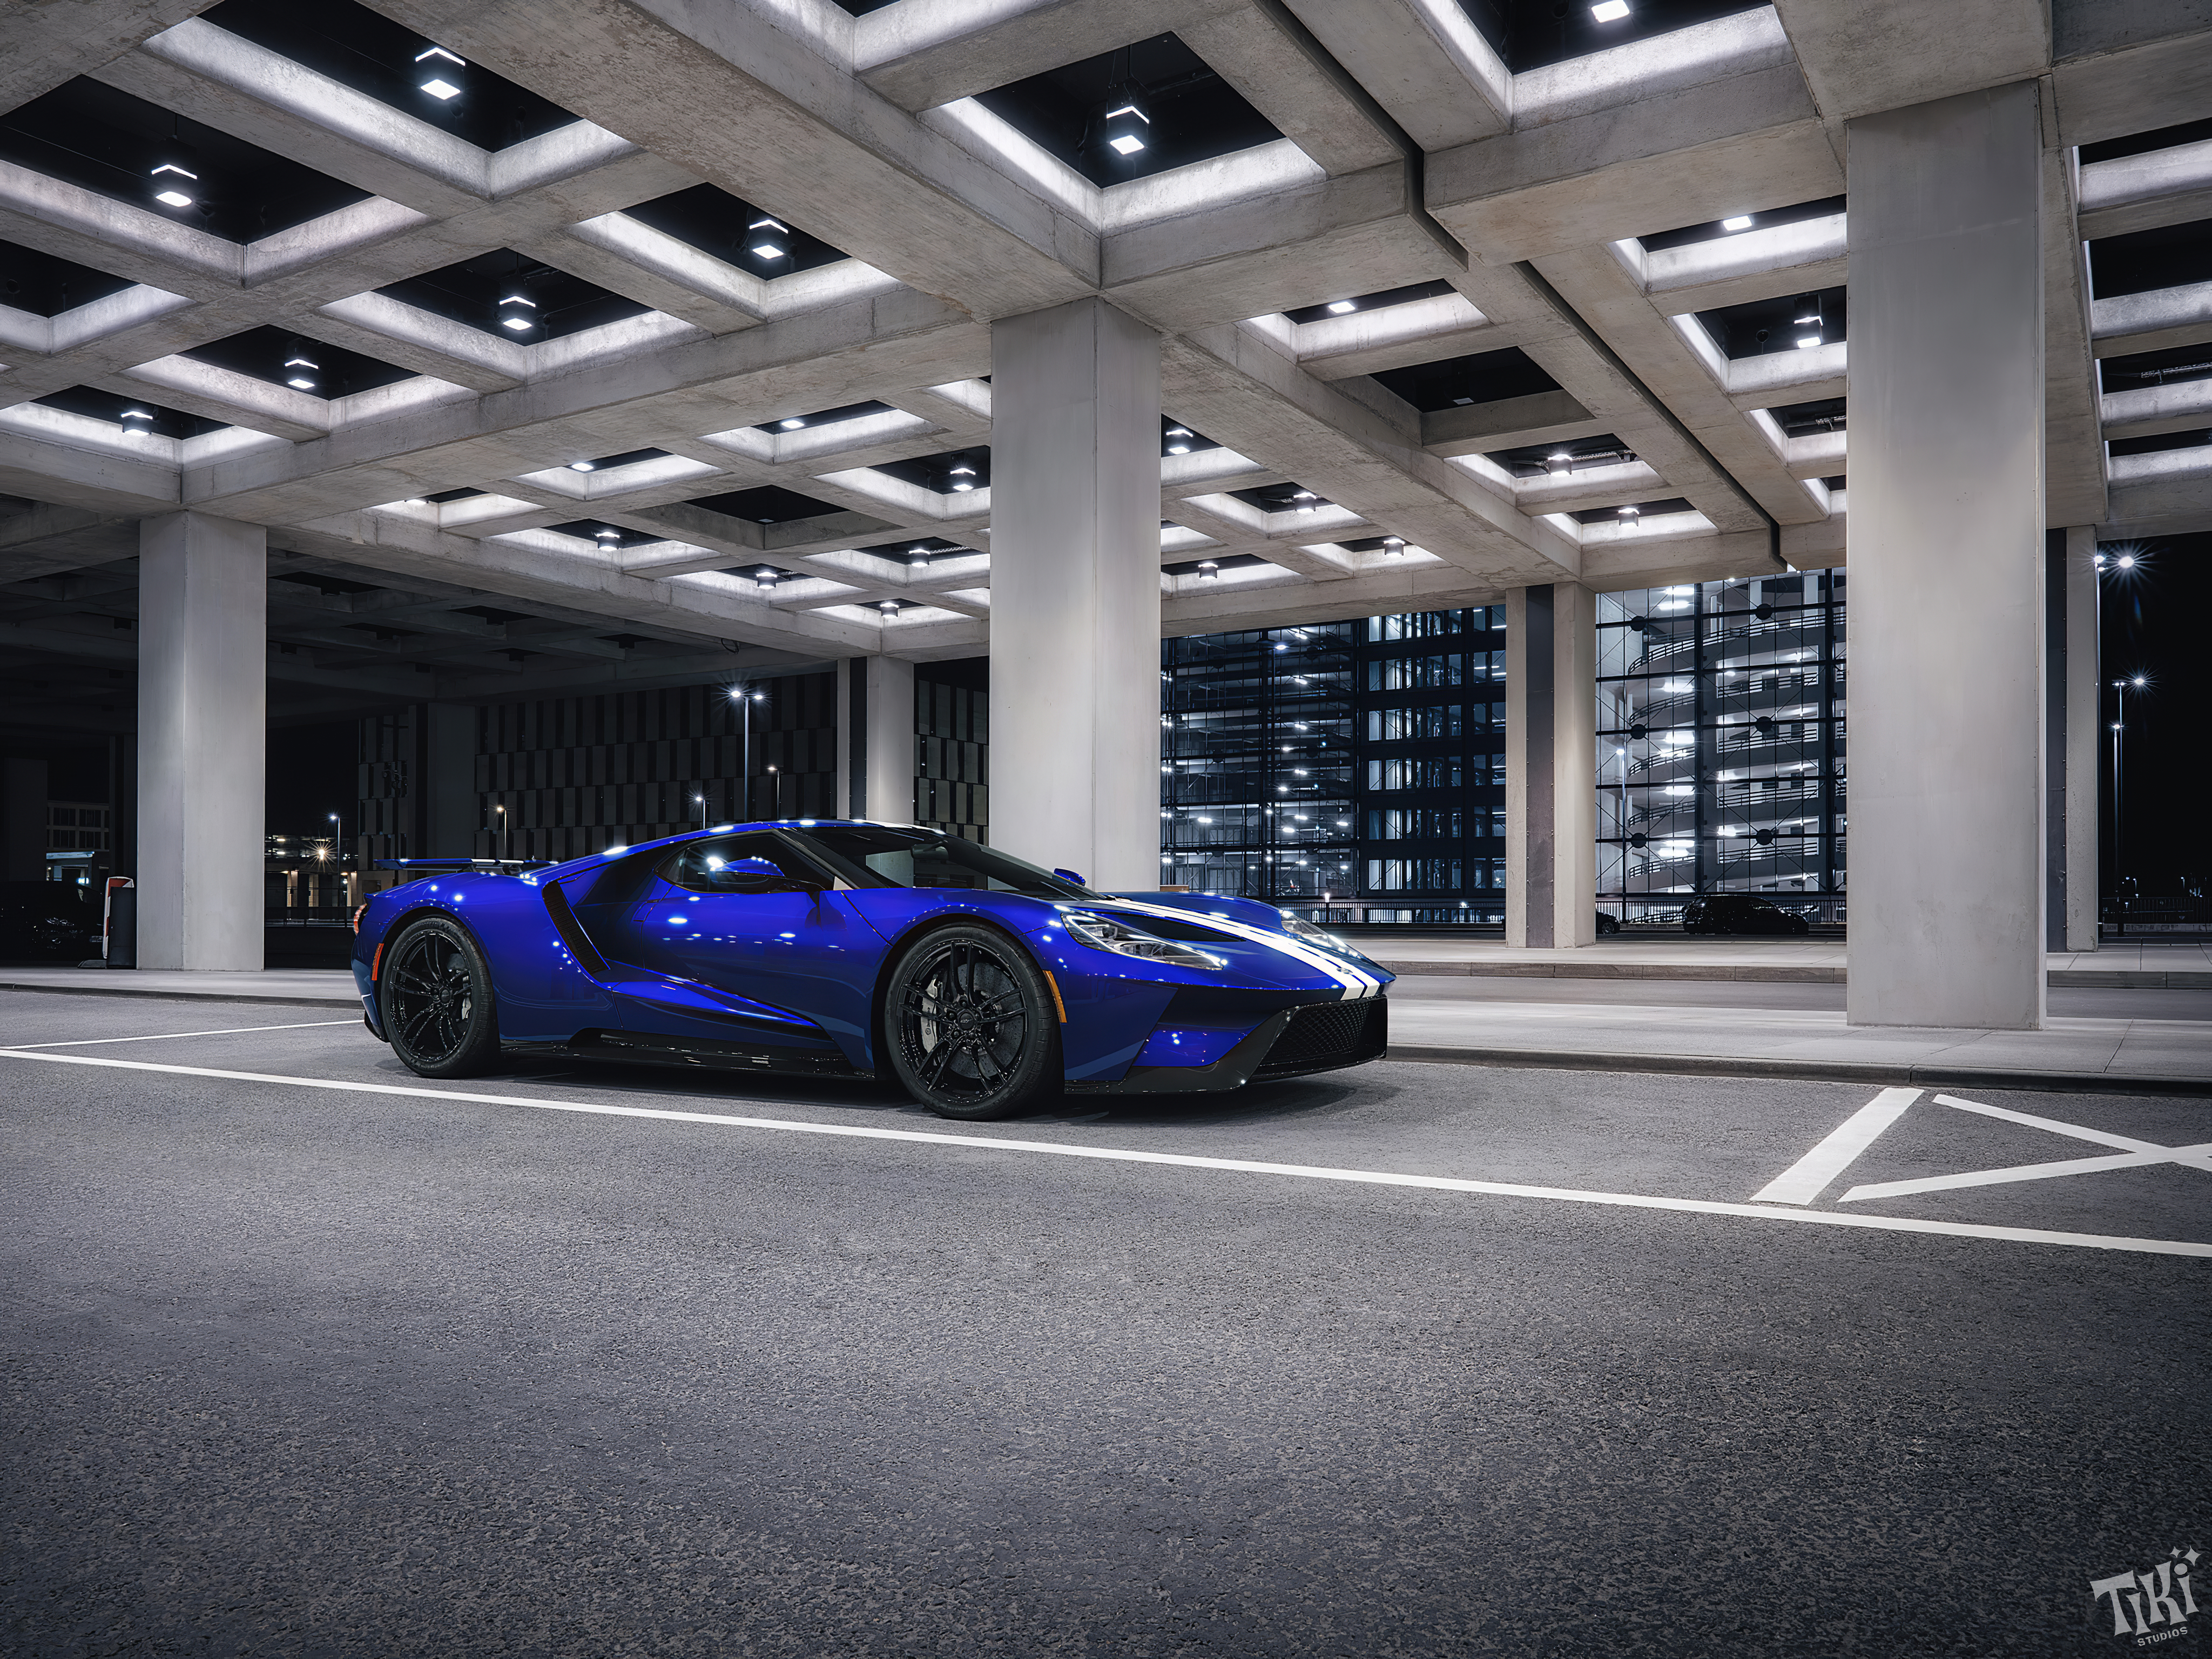 Blue Ford Gt40 with white stripes at night in bright light